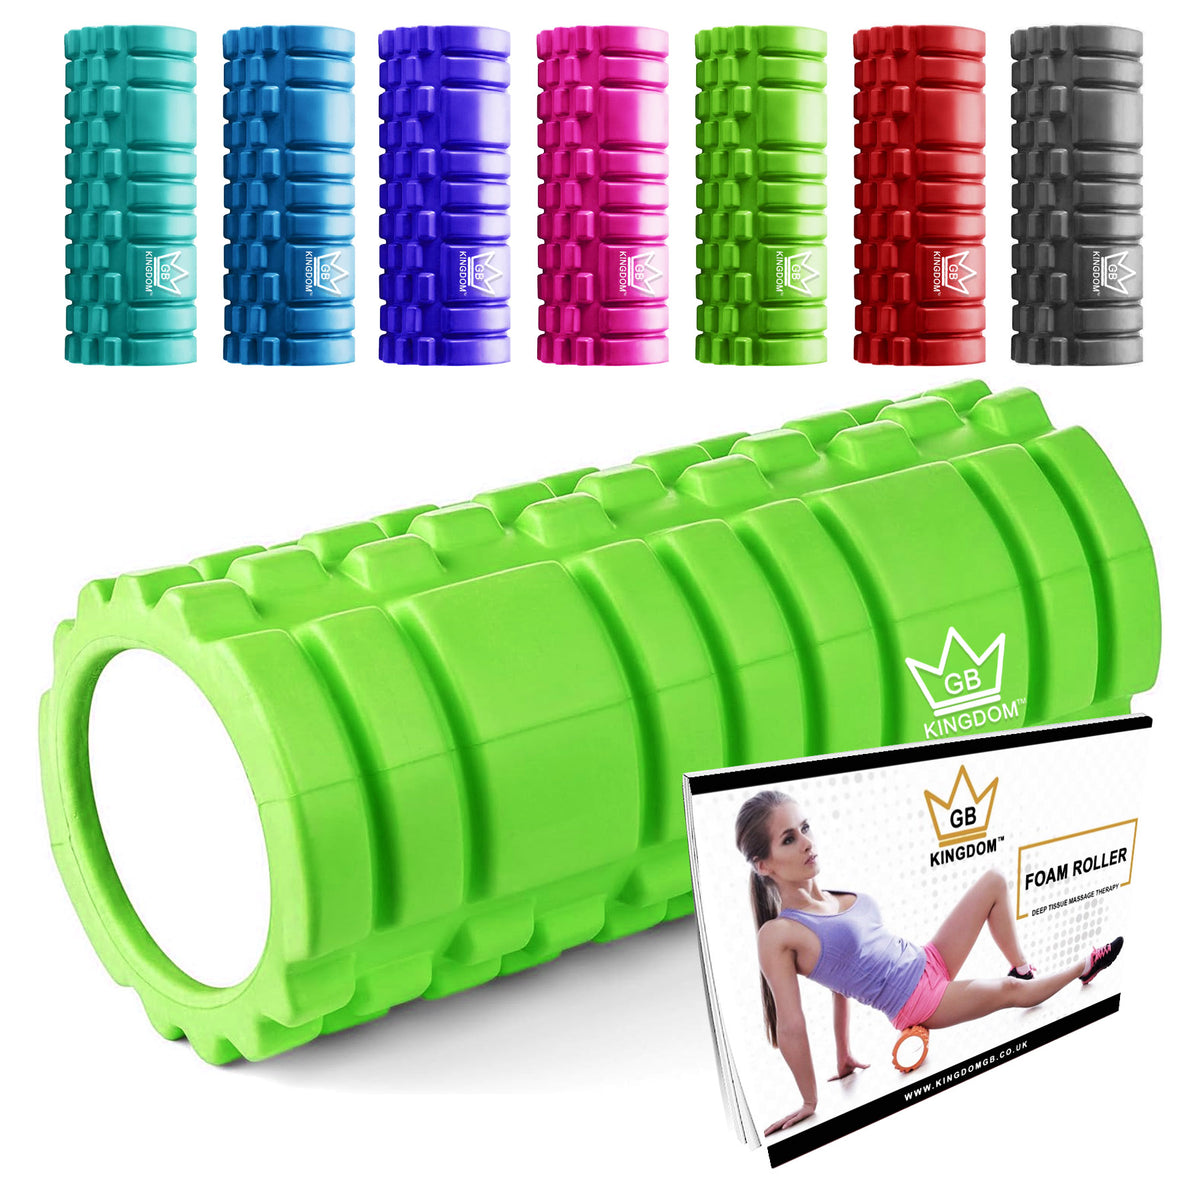 Kingdom GB Grid Foam Roller for Deep Tissue Muscle Massage Trigger Point Physio Fitness Exercise 33cm